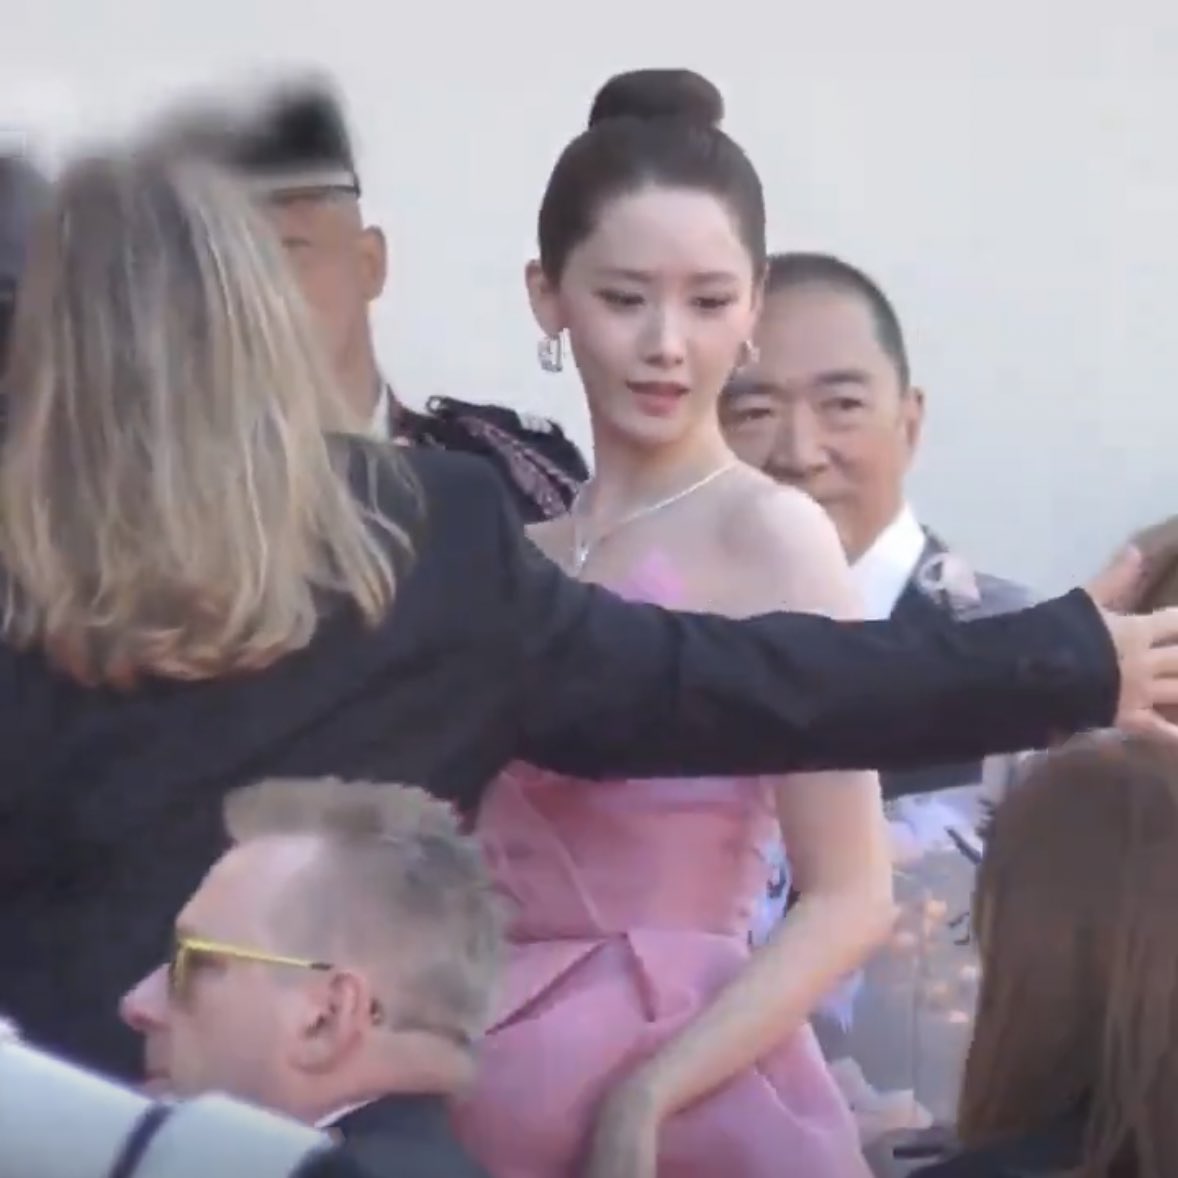 @PopCrave Kelly, Massiel and YoonA have really suffered on the cannes red carpet with that arm lady.